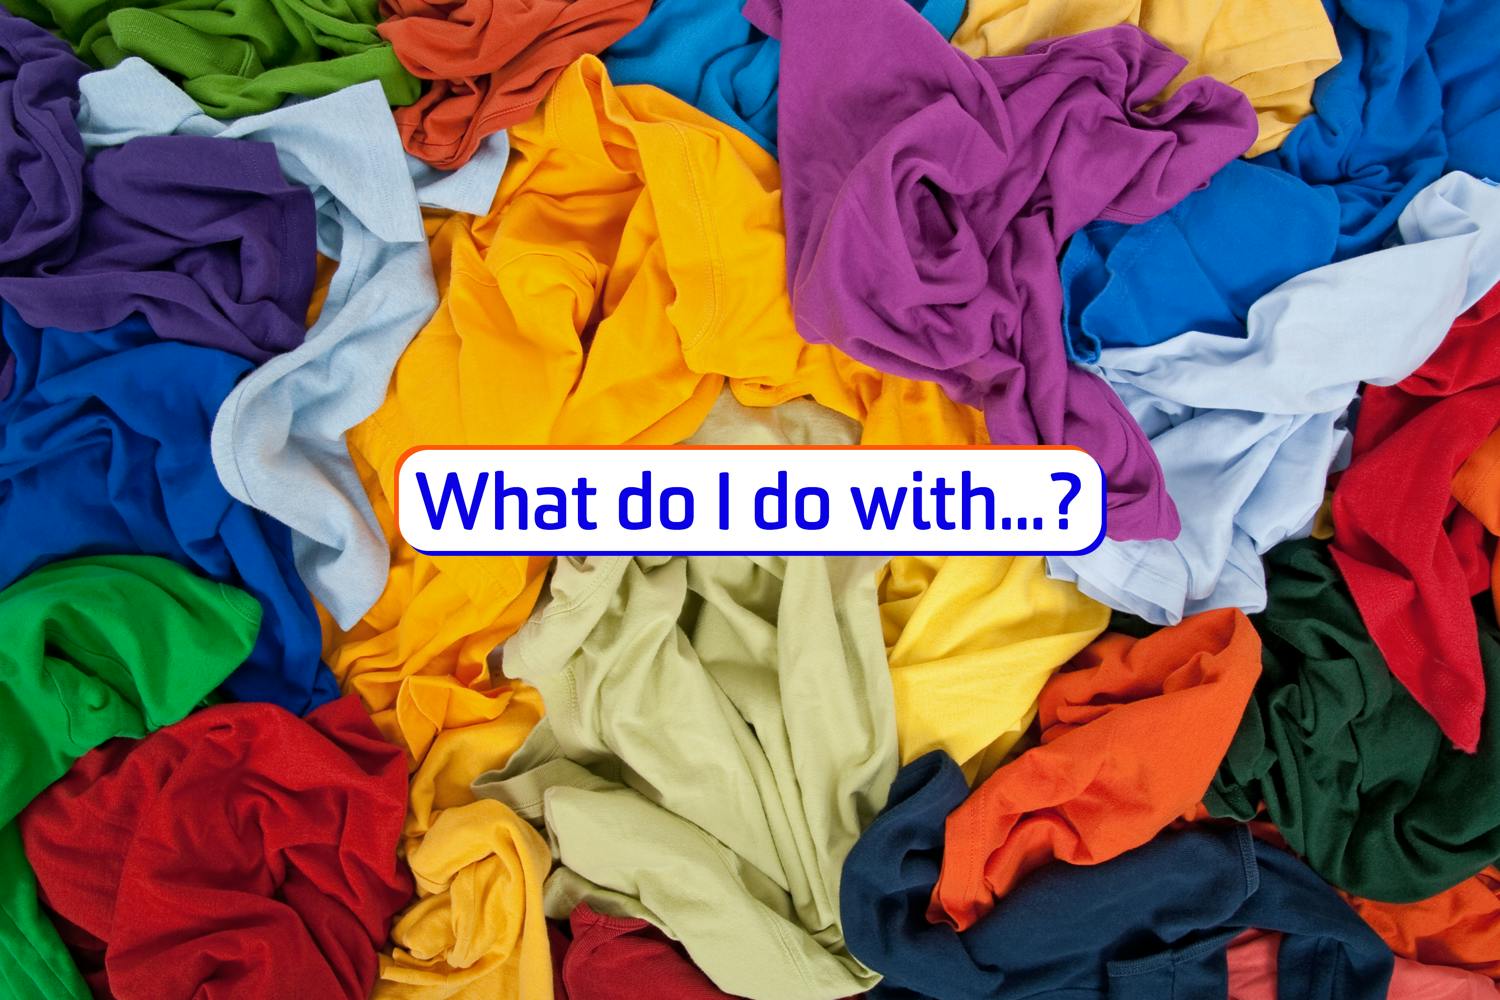 What do I do with old clothes and textiles?